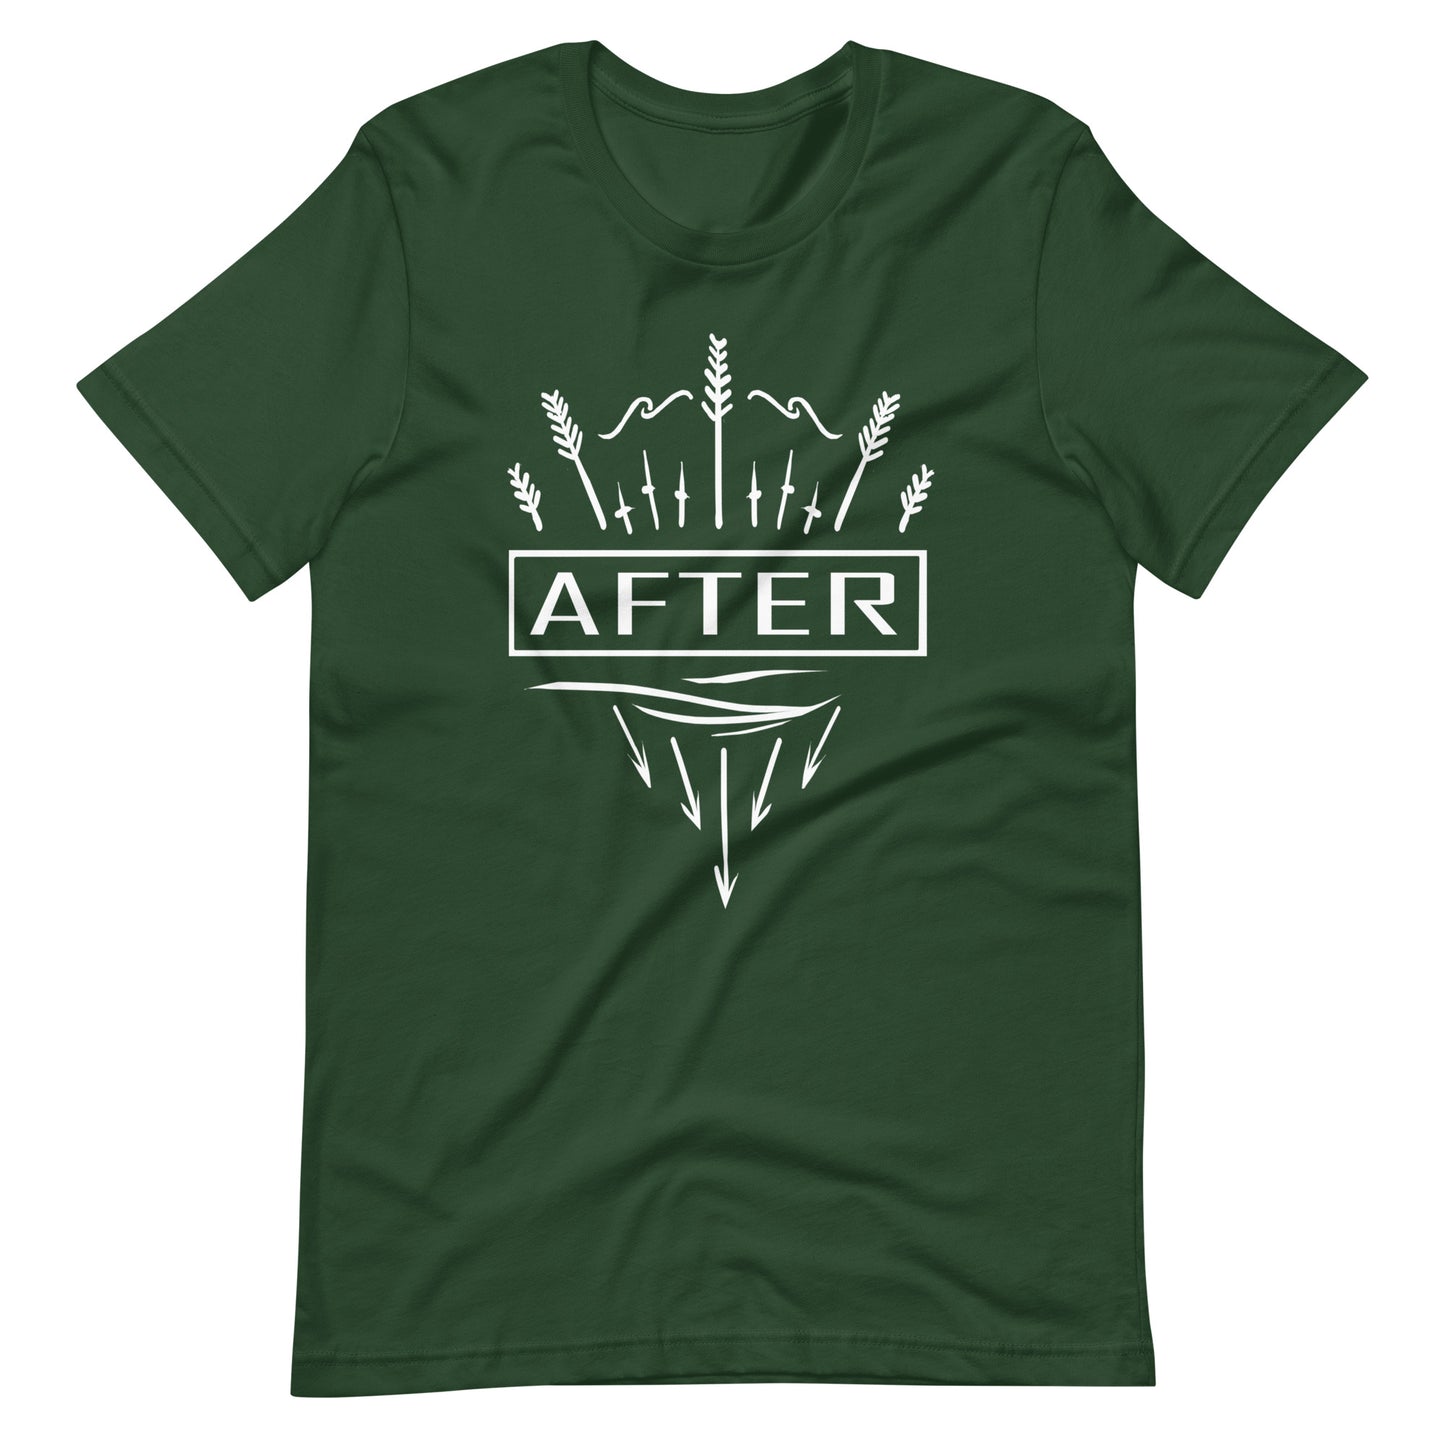 After - Men's t-shirt - Forest Front